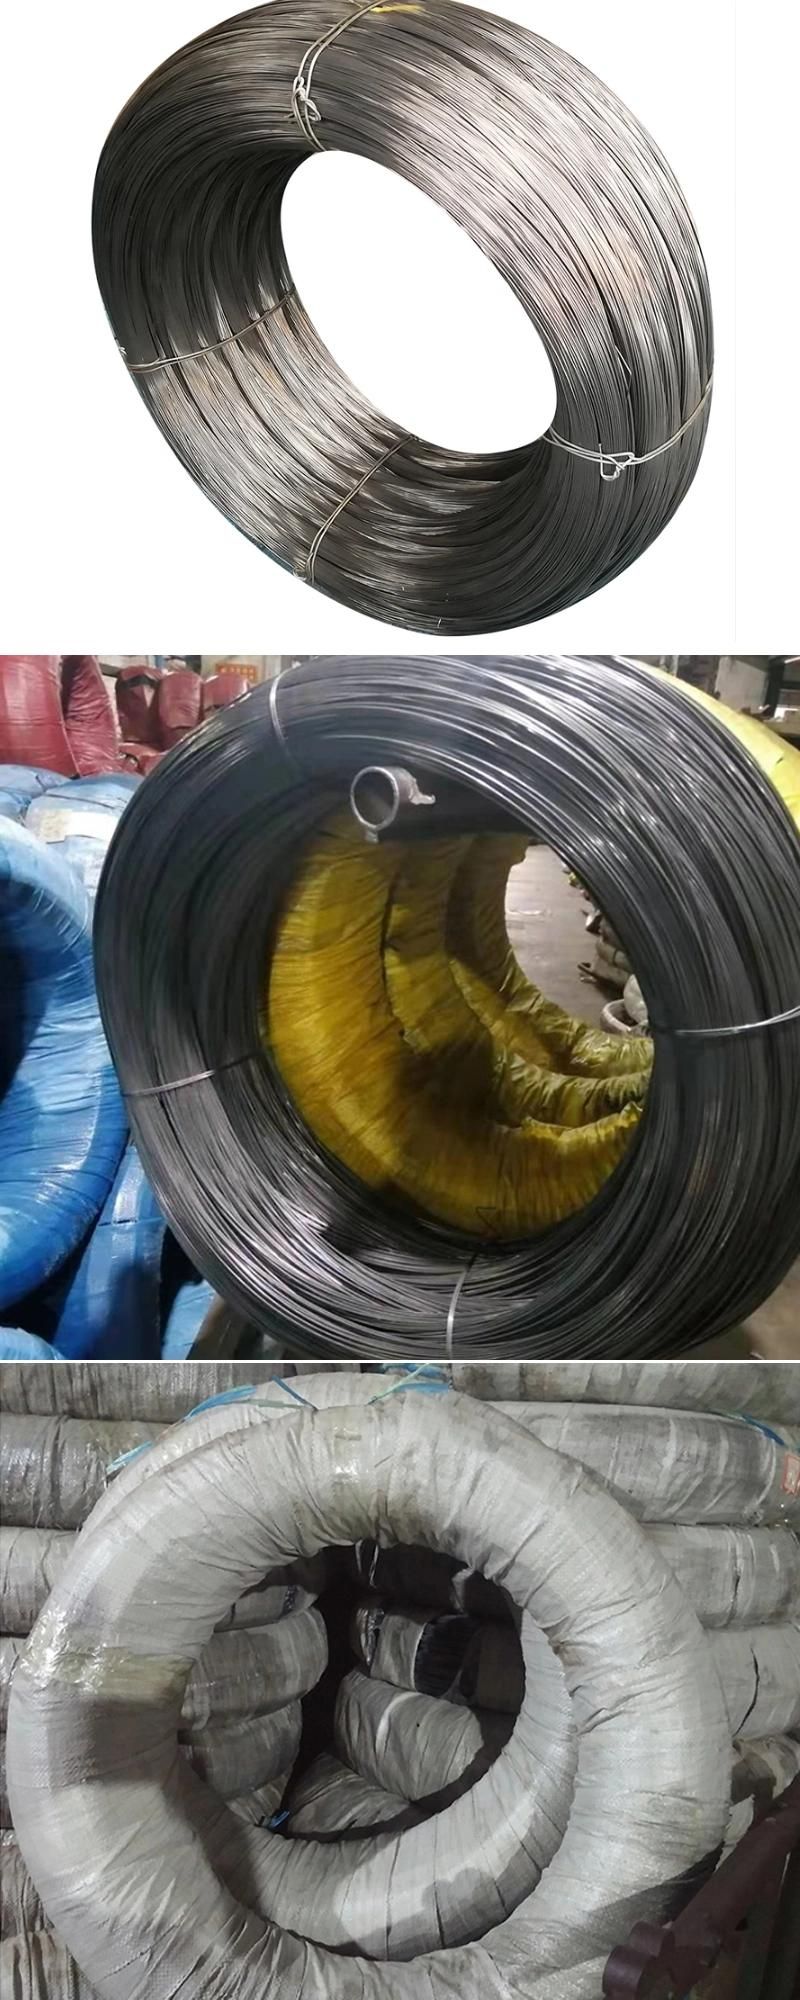 Chinese Suppliers Helical Compression Spring Wire